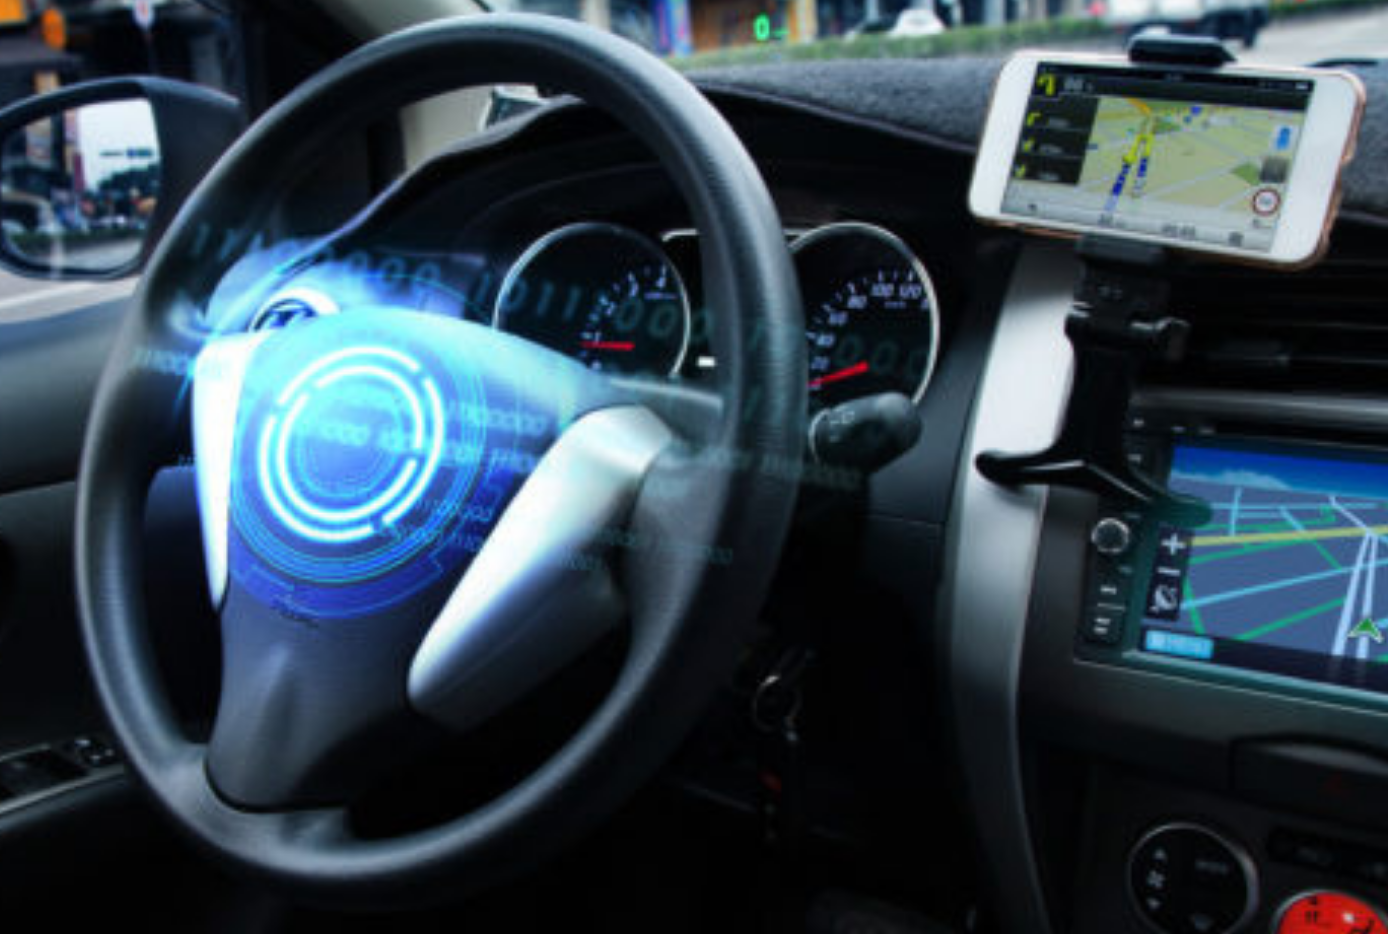 Hands-free cars: A stepping stone to the future overblown by the media?